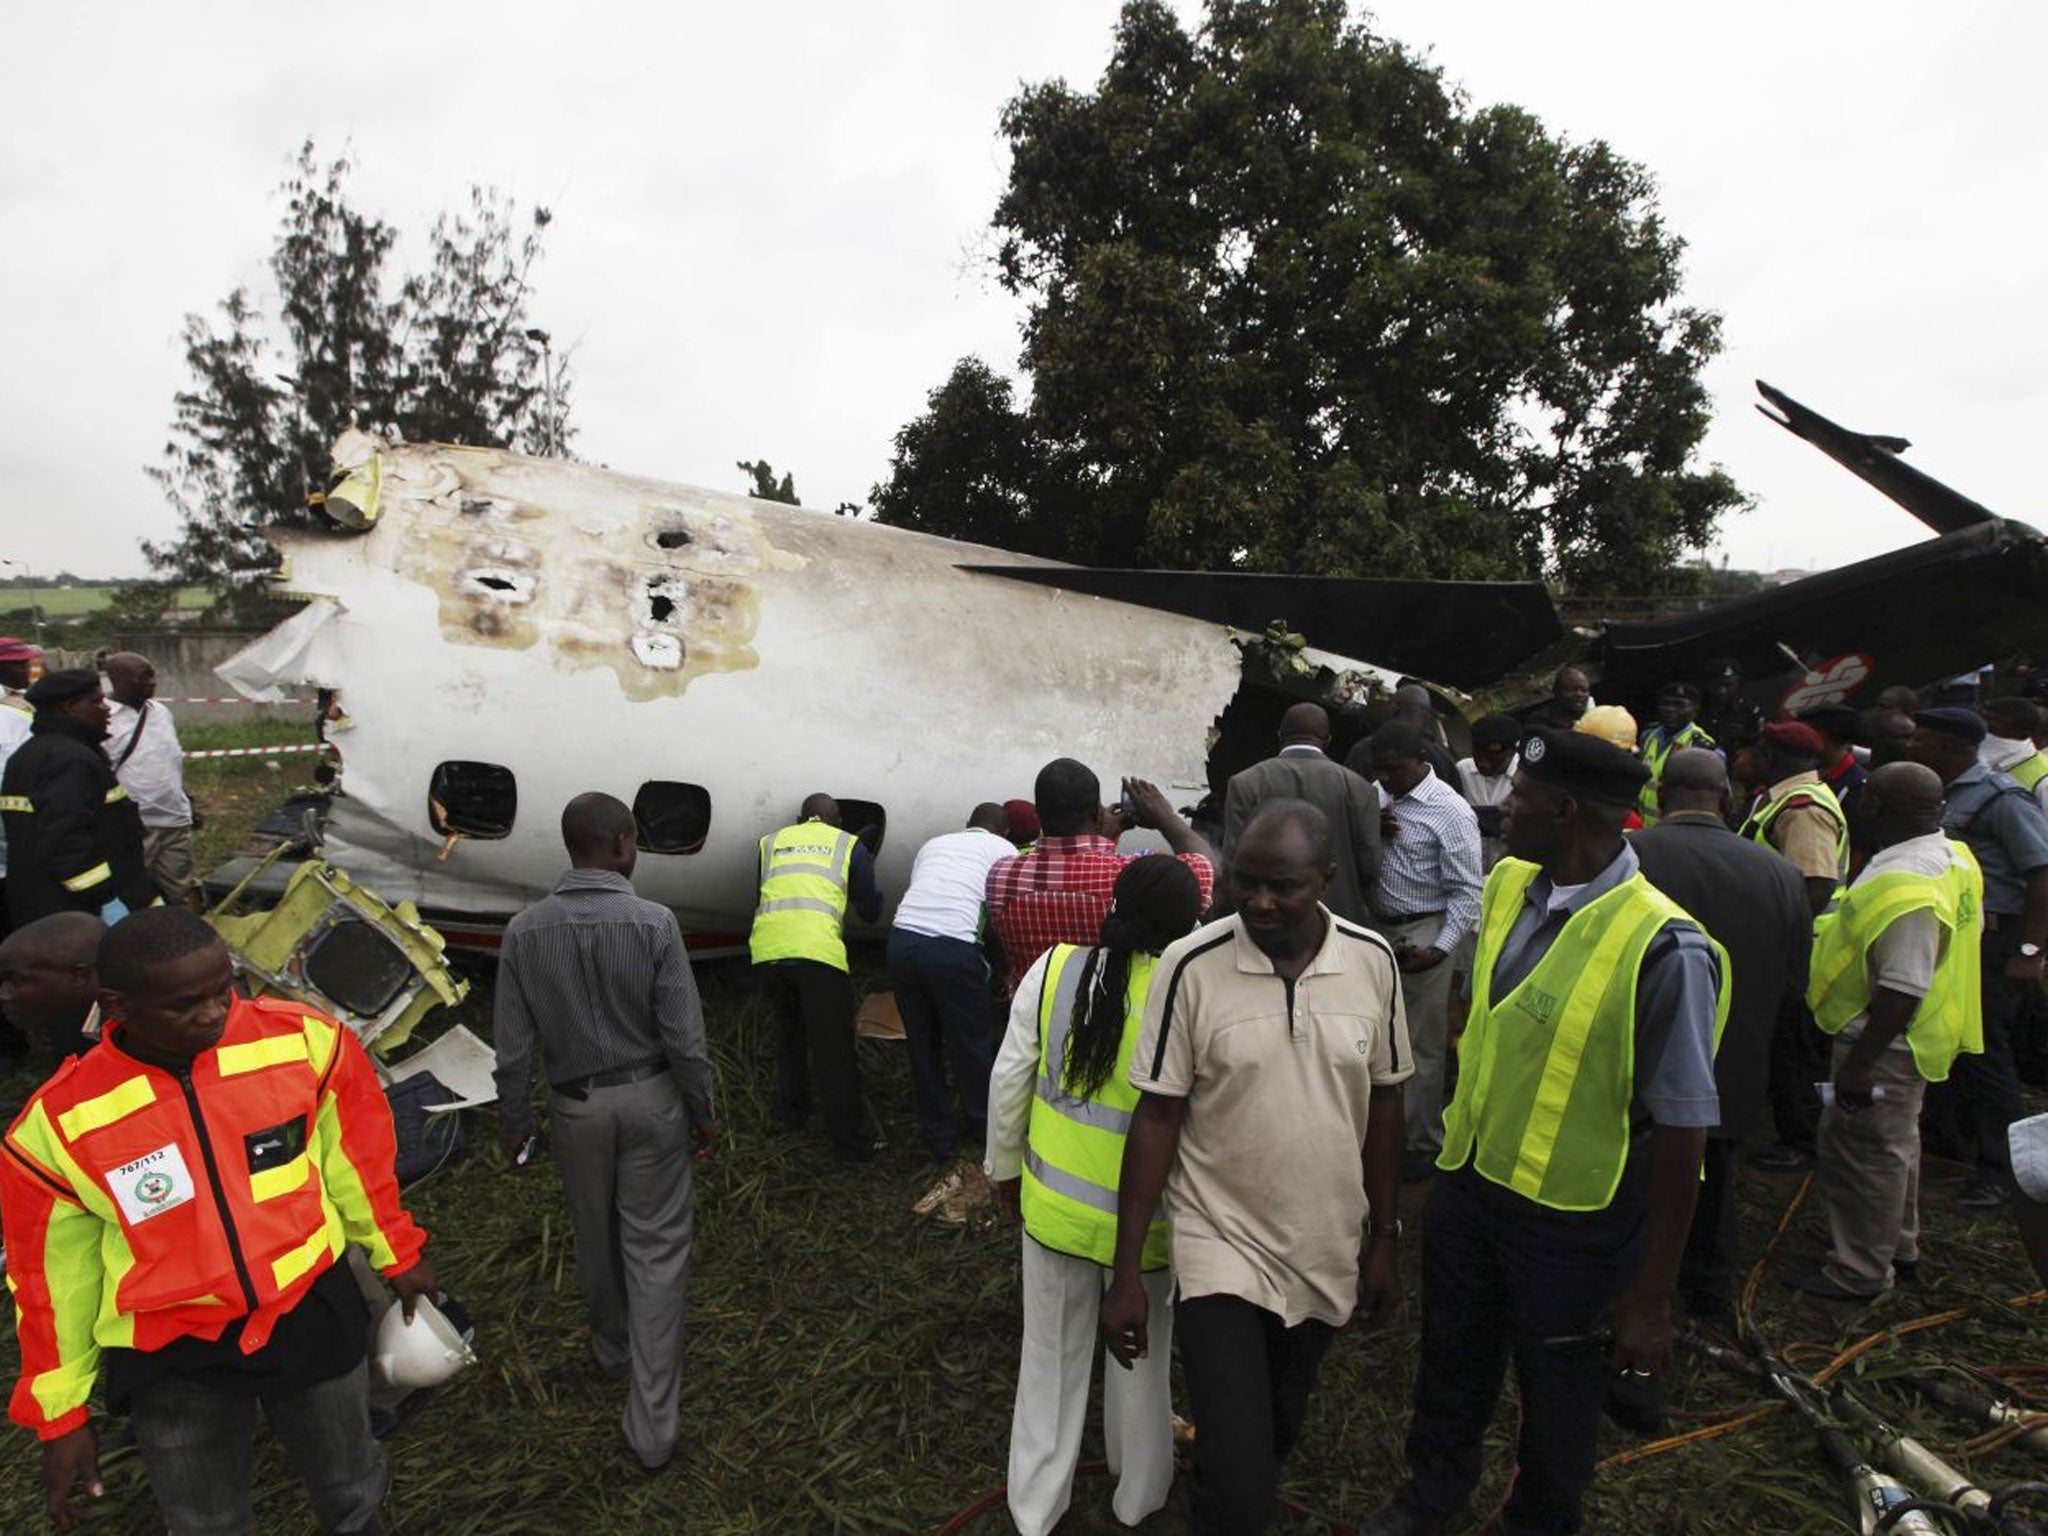 The Embraer passenger plane crashed just outside Lagos airport's domestic terminal this morning